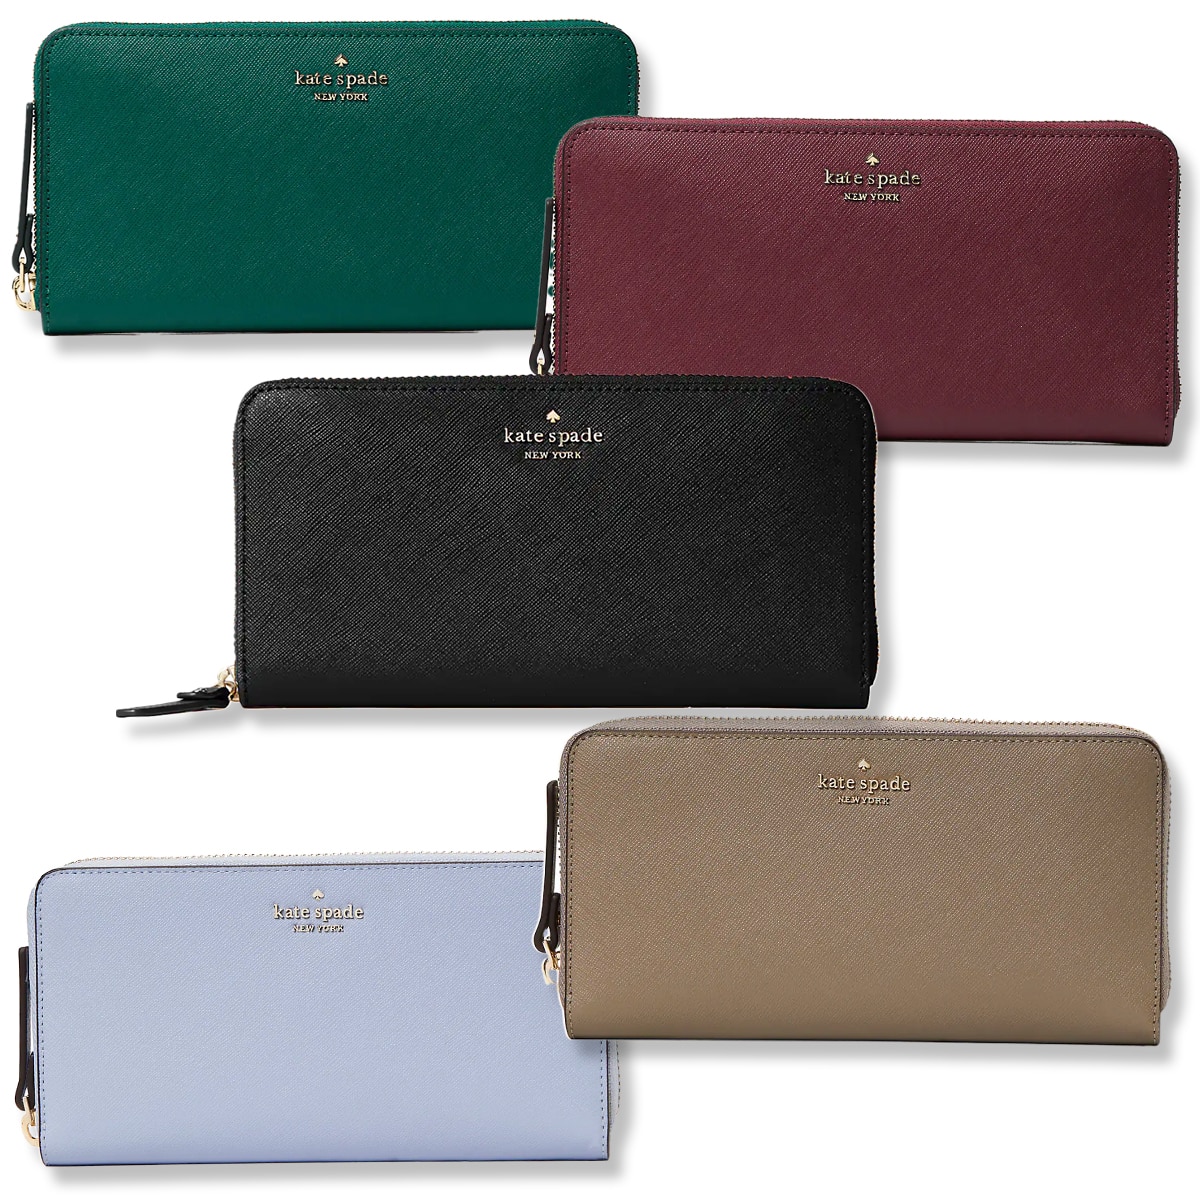 Kate Spade 24-Hour Flash Deal: Get a $230 Wallet for Just $55